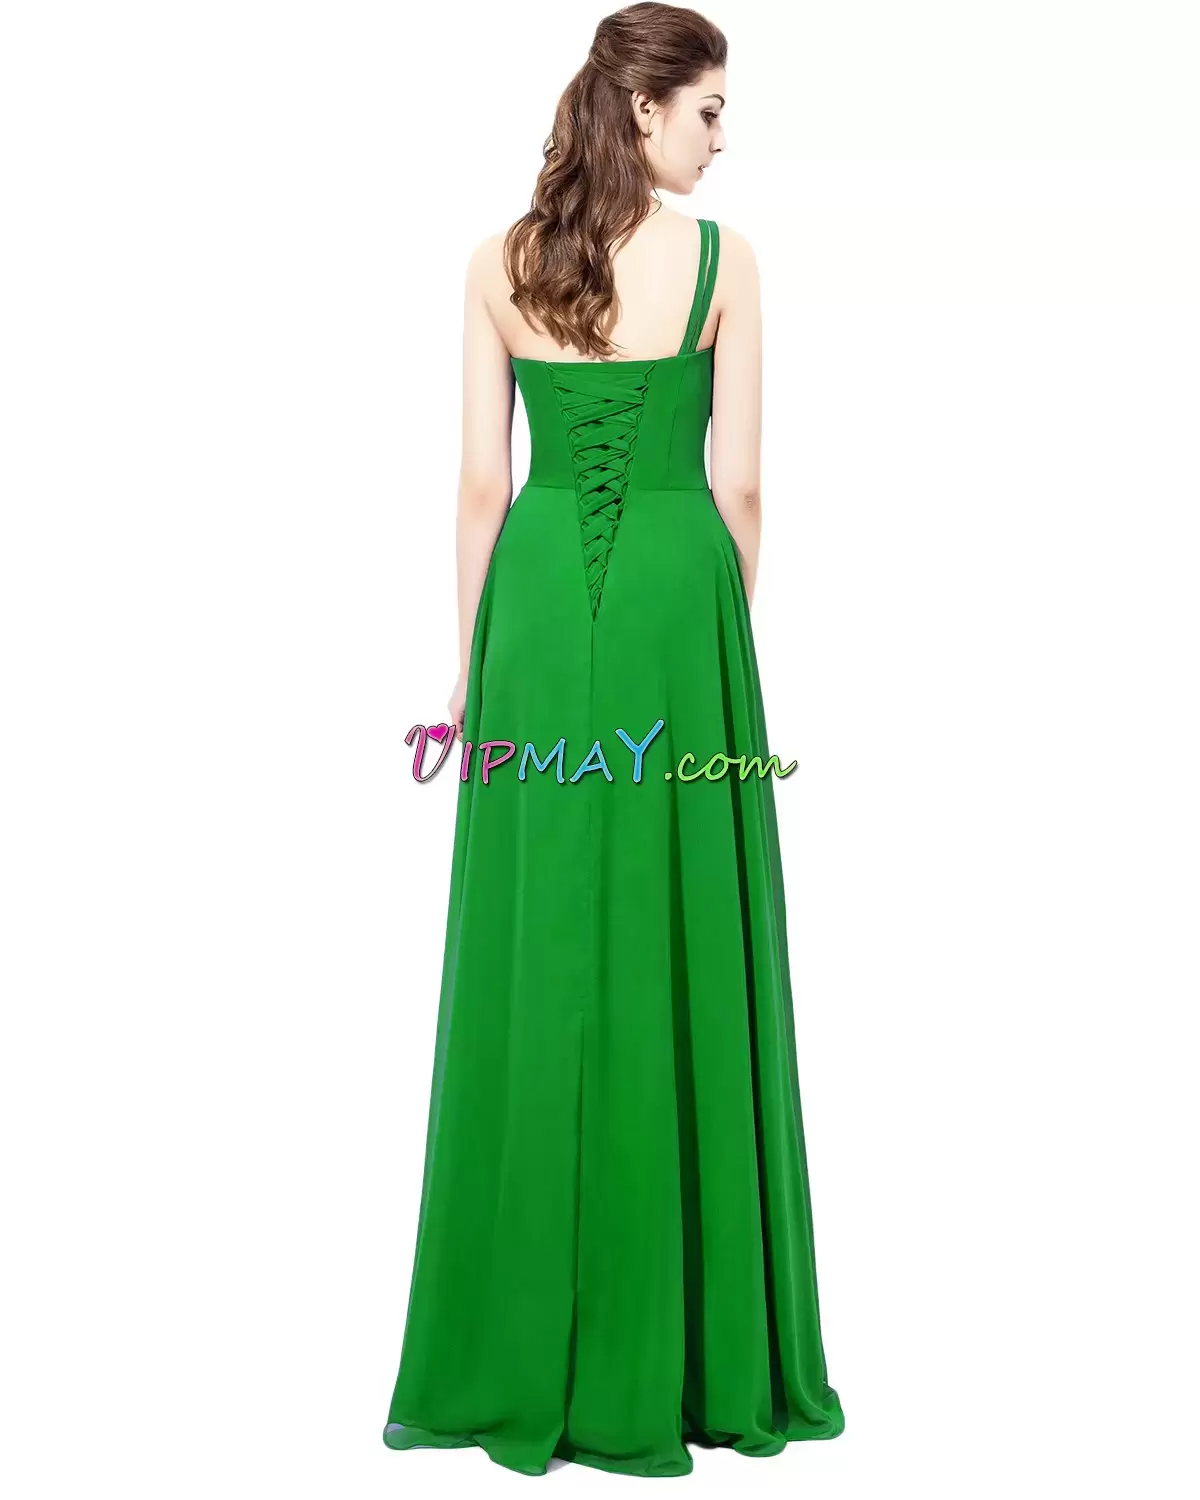 one shoulder homecoming dress,chiffon mother of the groom dress,chiffon party dress for womens,emerald green homecoming dress,